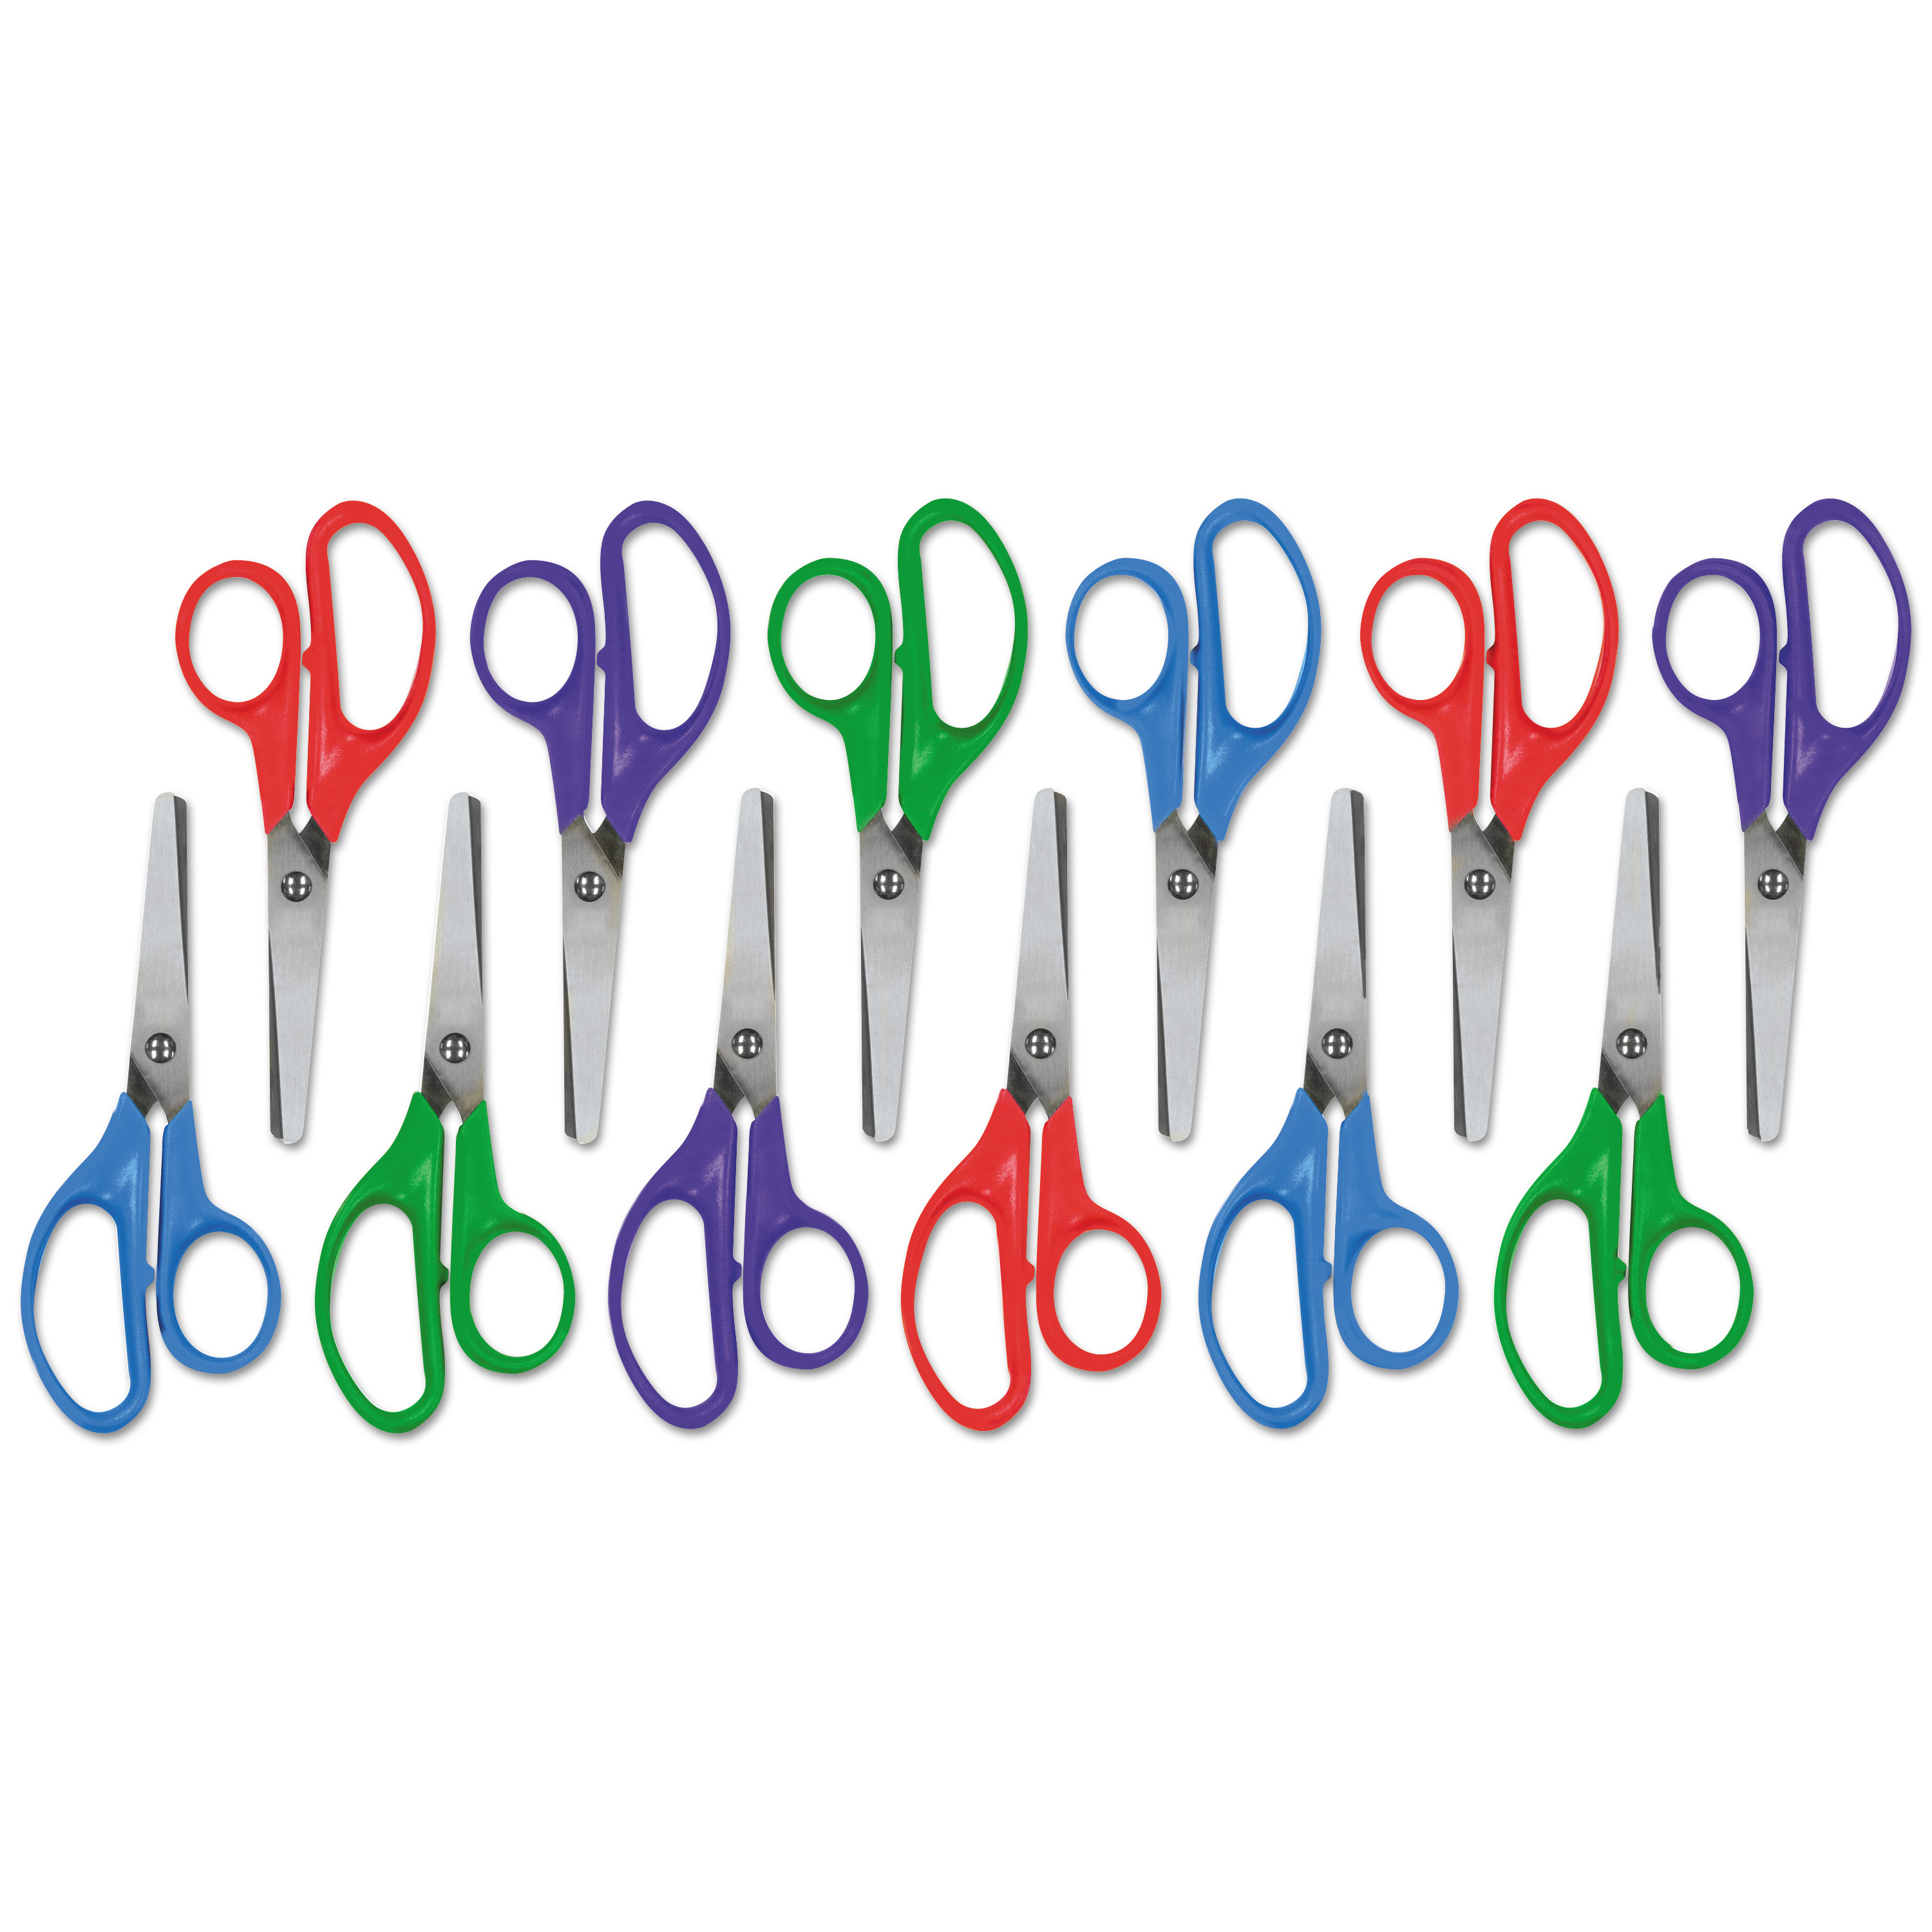  Universal UNV92023 Kids' Scissors, Rounded Tip, 5 Long, 1.75 Cut Length, Assorted Straight Handles, 12/Pack (UNV92023) 